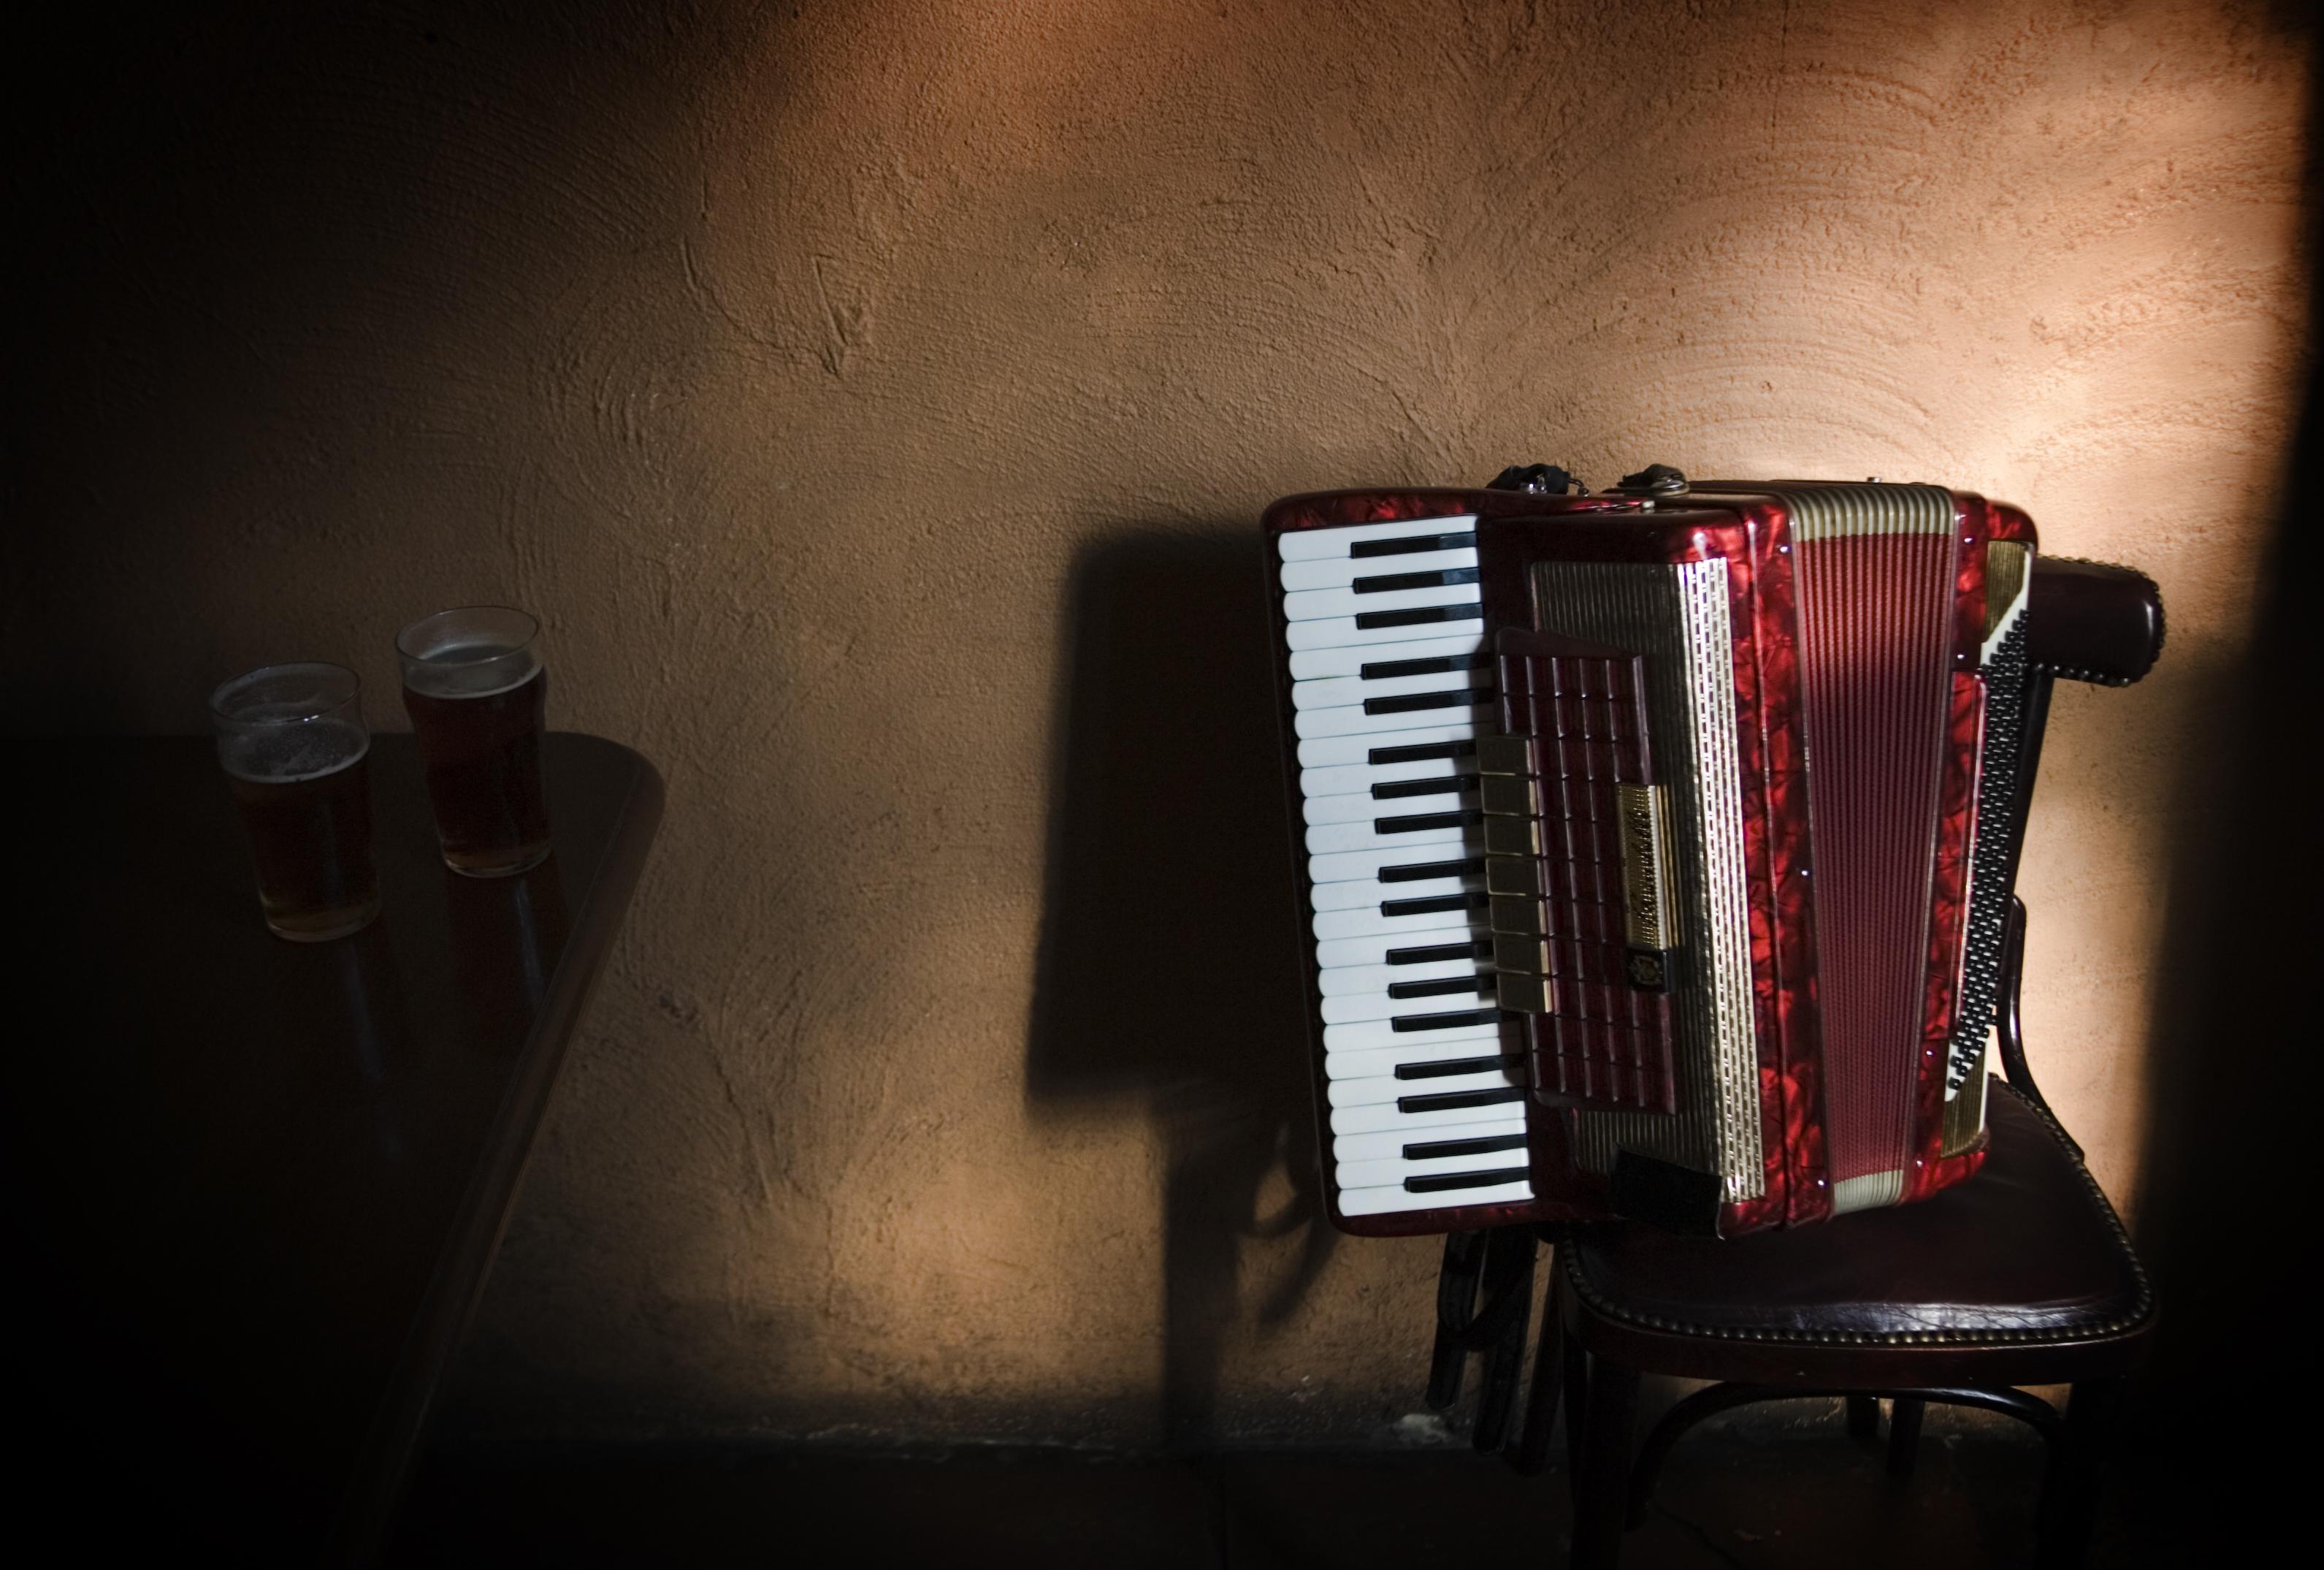 Accordion Wallpapers HD Backgrounds, Image, Pics, Photos Free.